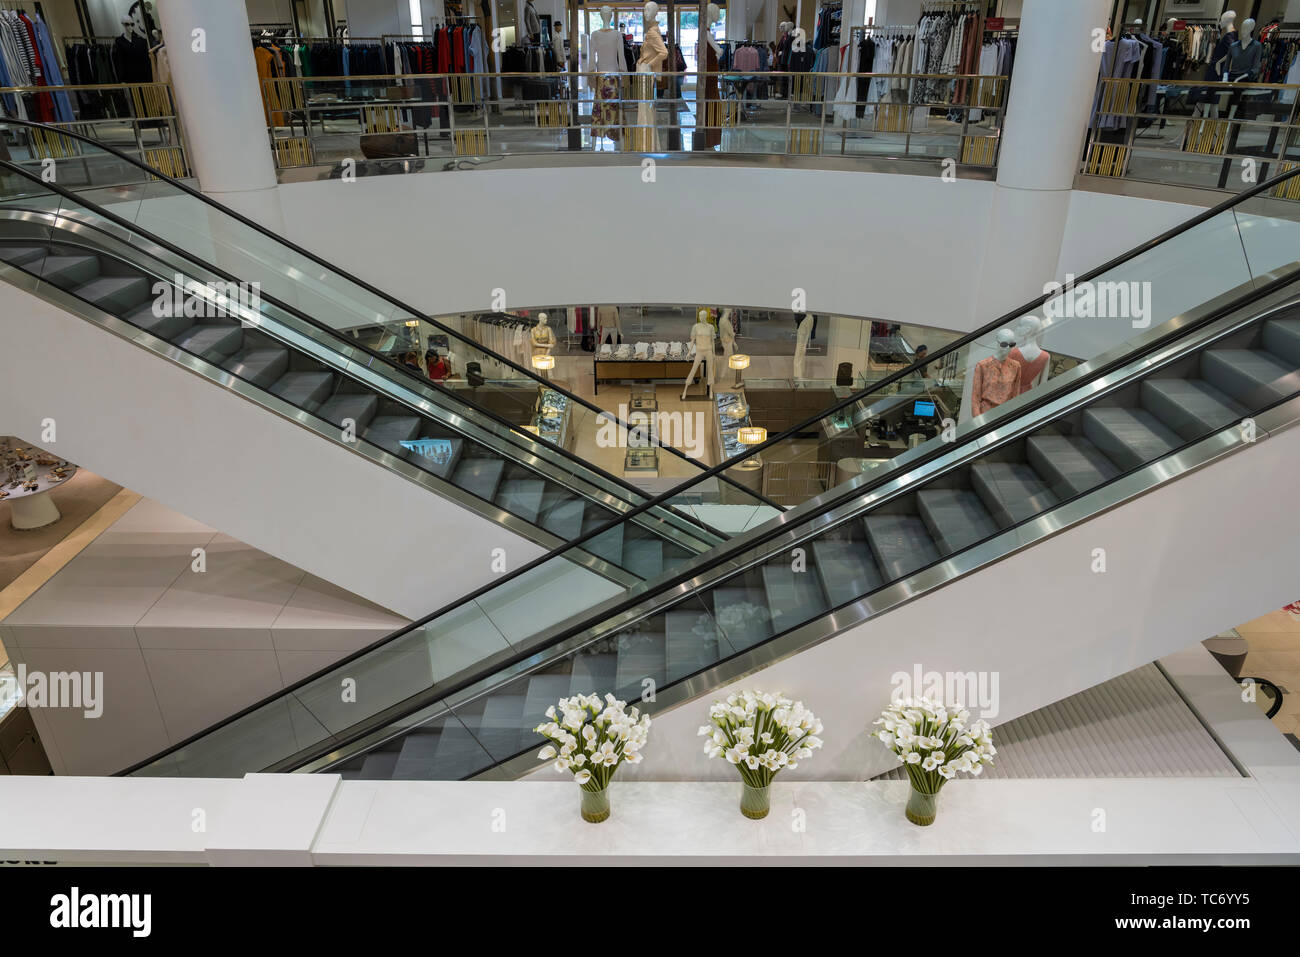 Escalators in a shopping mall in the  El Paseo shopping district in Palm Desert, California, USA. Stock Photo